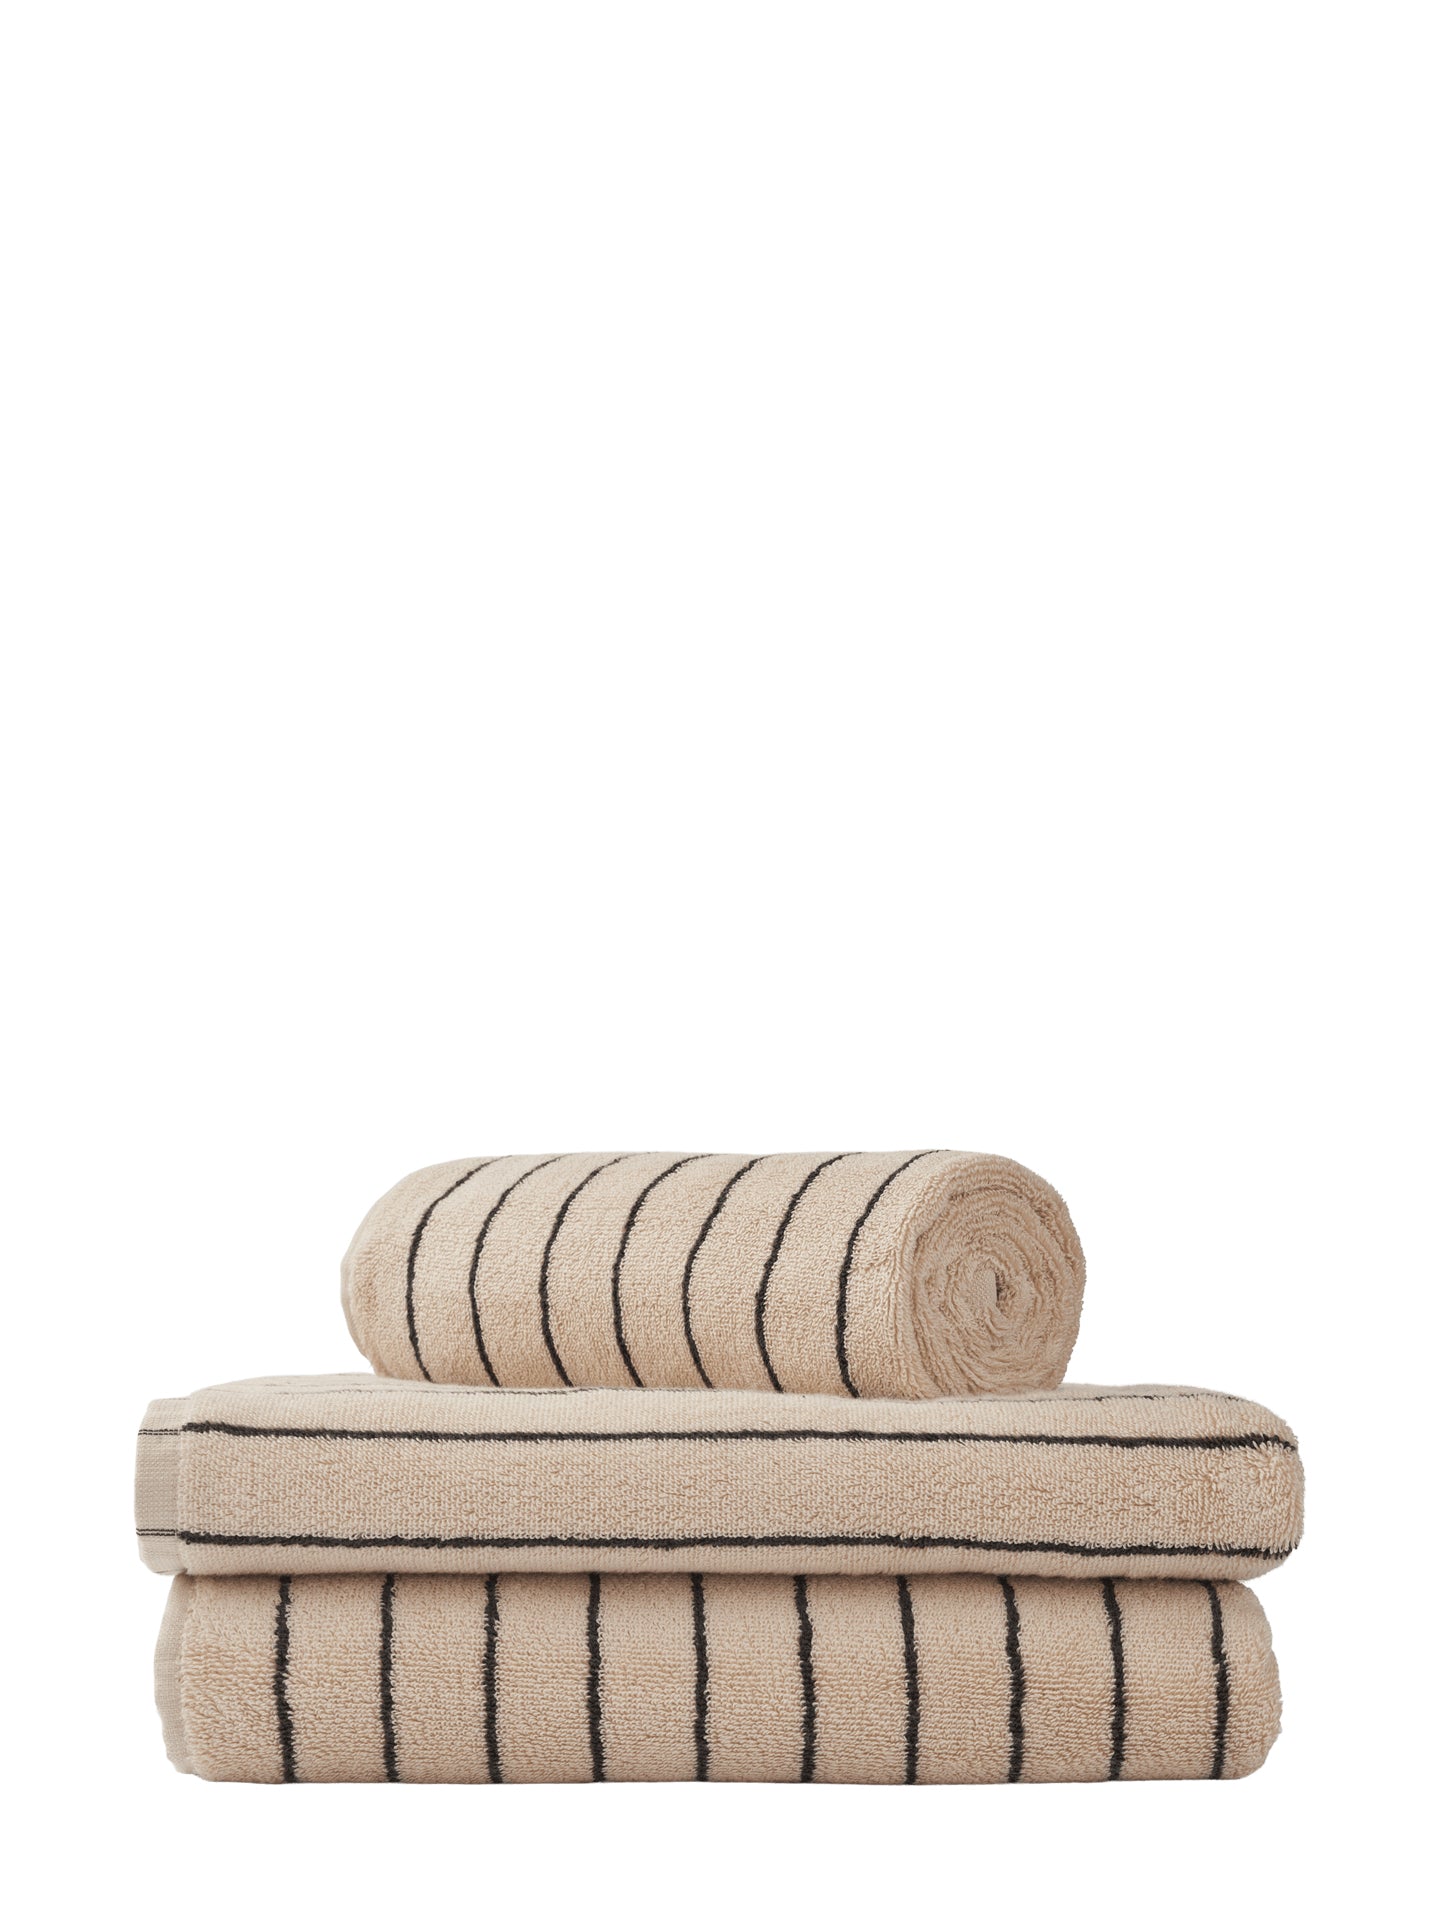 Naram guest towel, creme with thin stripe